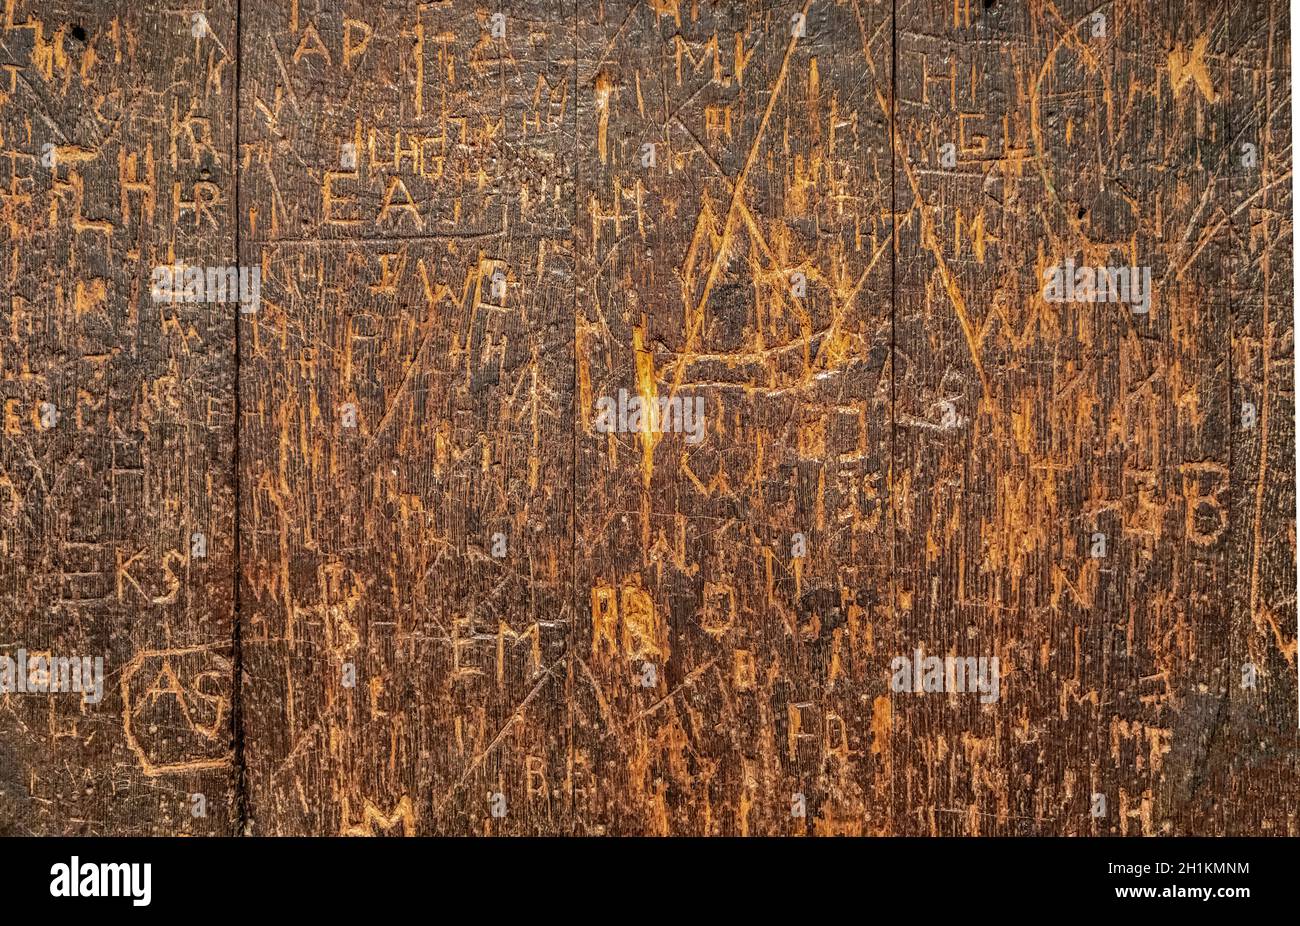 old wooden surface covered with lots of engraved graffiti tags Stock Photo